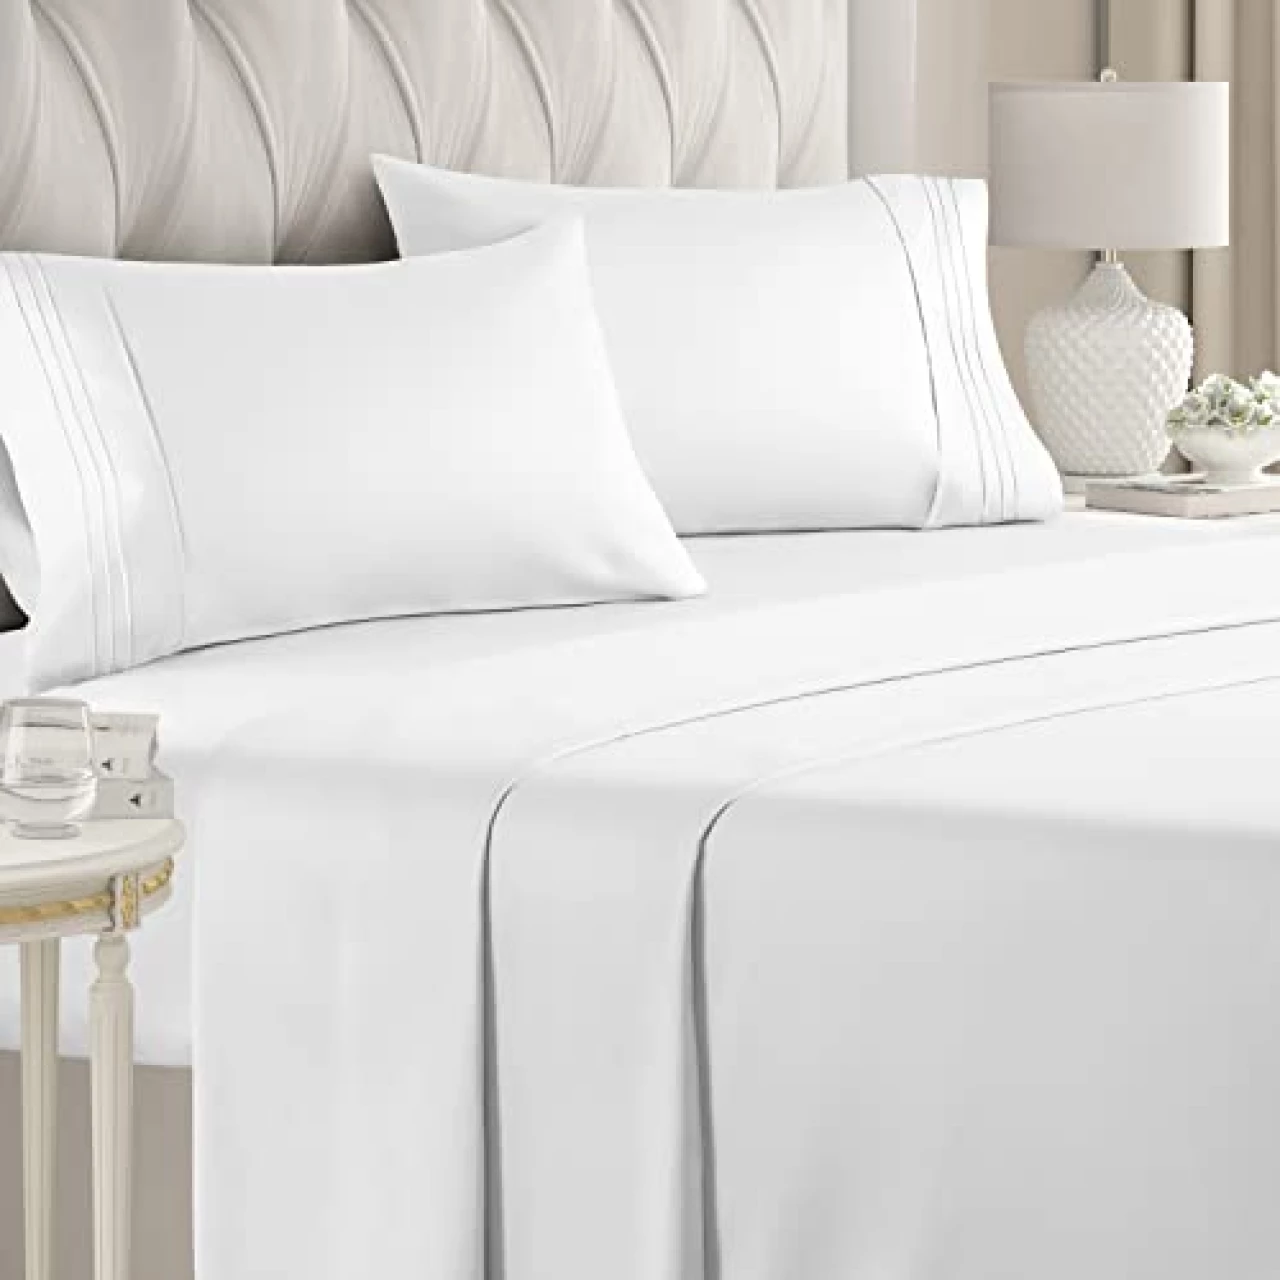 Queen Size 4 Piece Sheet Set - Comfy Breathable &amp; Cooling Sheets - Hotel Luxury Bed Sheets for Women &amp; Men - Deep Pockets, Easy-Fit, Extra Soft &amp; Wrinkle Free Sheets - White Oeko-Tex Bed Sheet Set